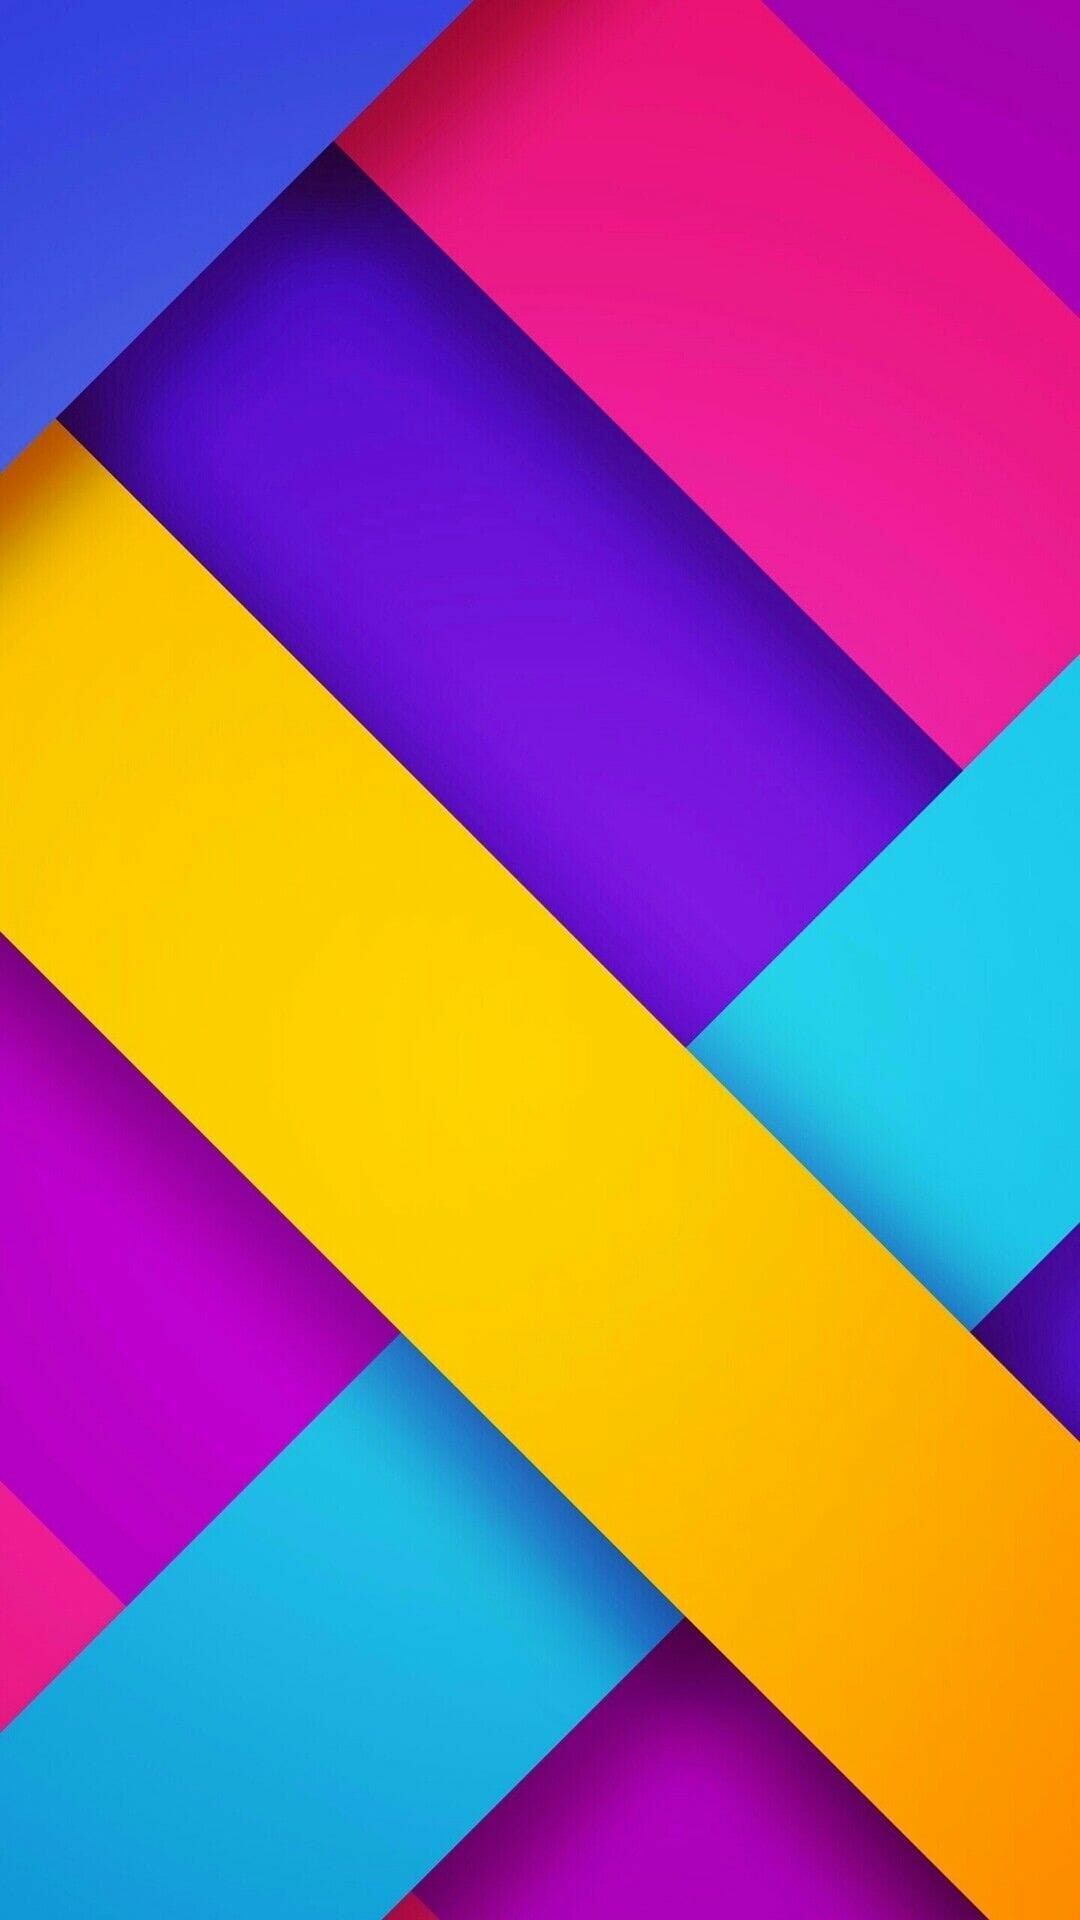 Geometric Abstract: Rectangles, Parallel sides, Stripes, Multicolored. 1080x1920 Full HD Background.